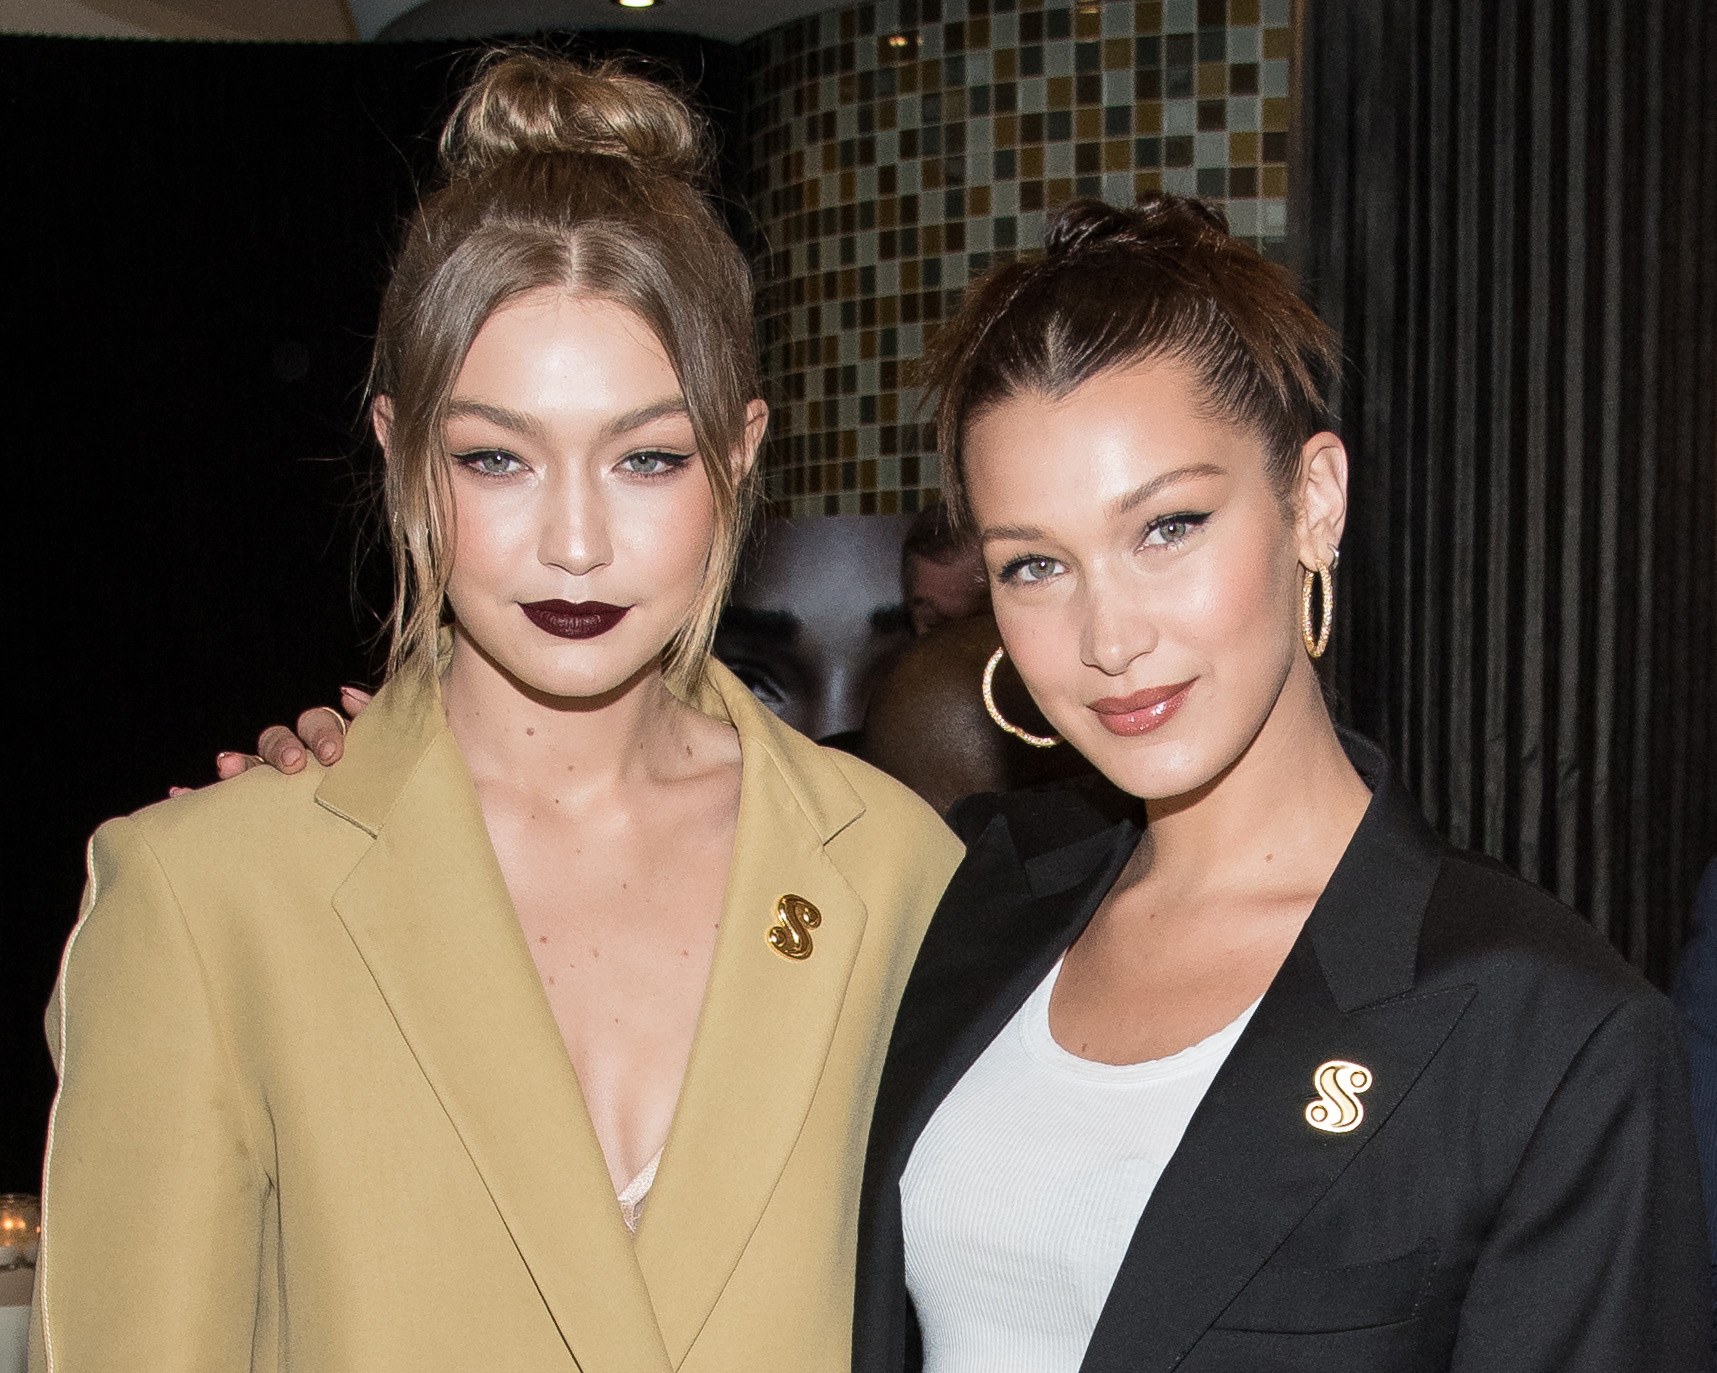 Photos: Gigi and Bella Hadid's Best Looks That Show Their Matching Style